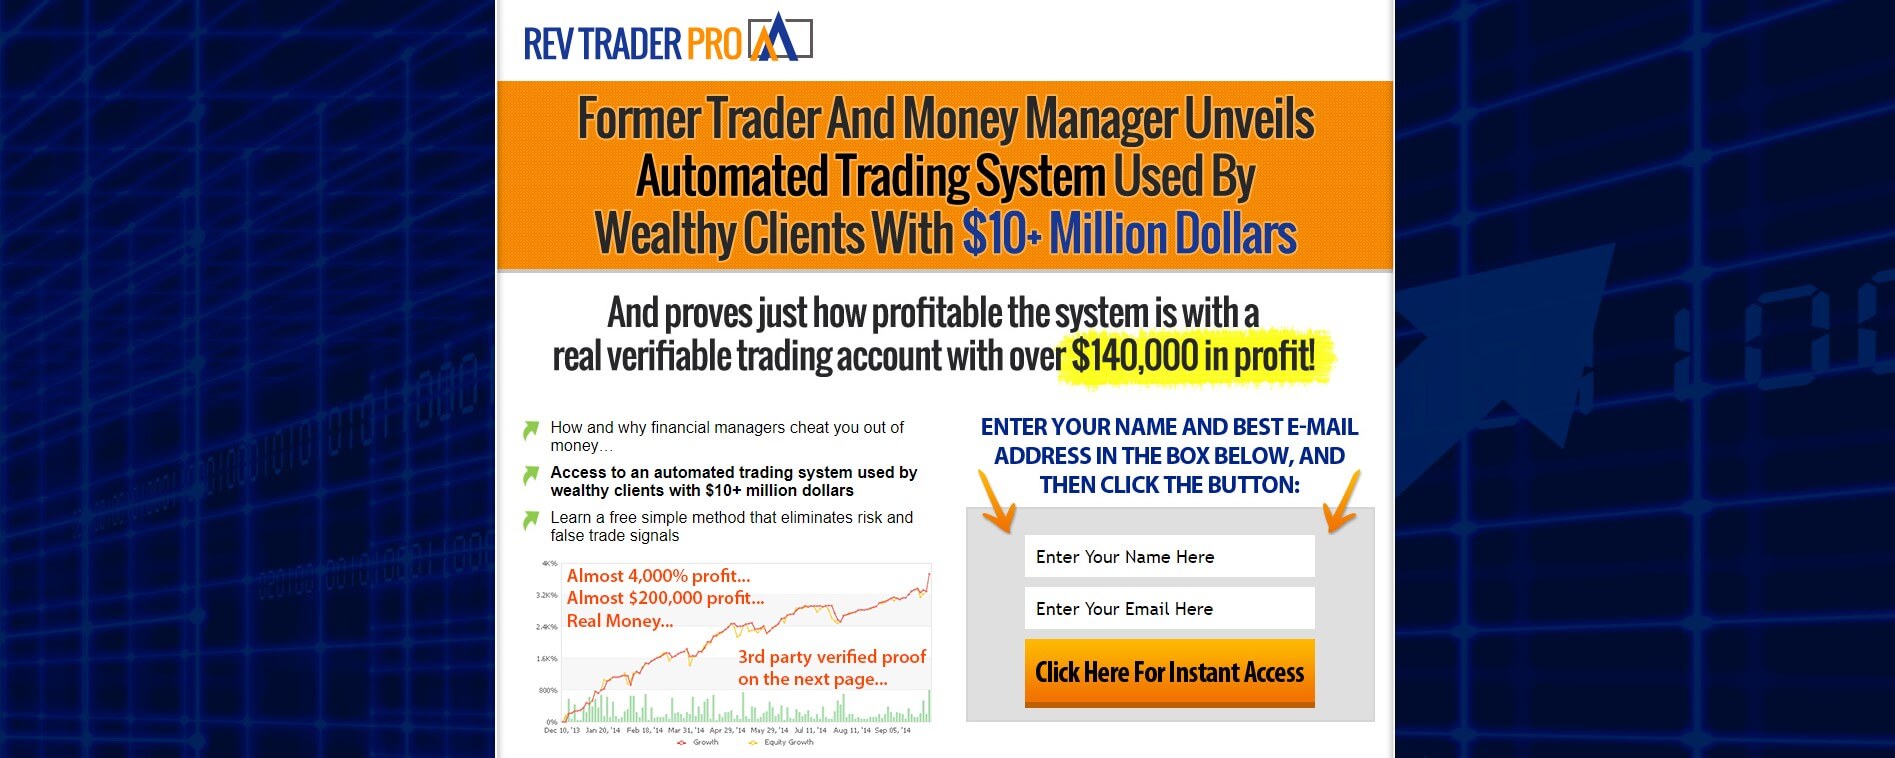 Forex trading pro system review forex market chart online